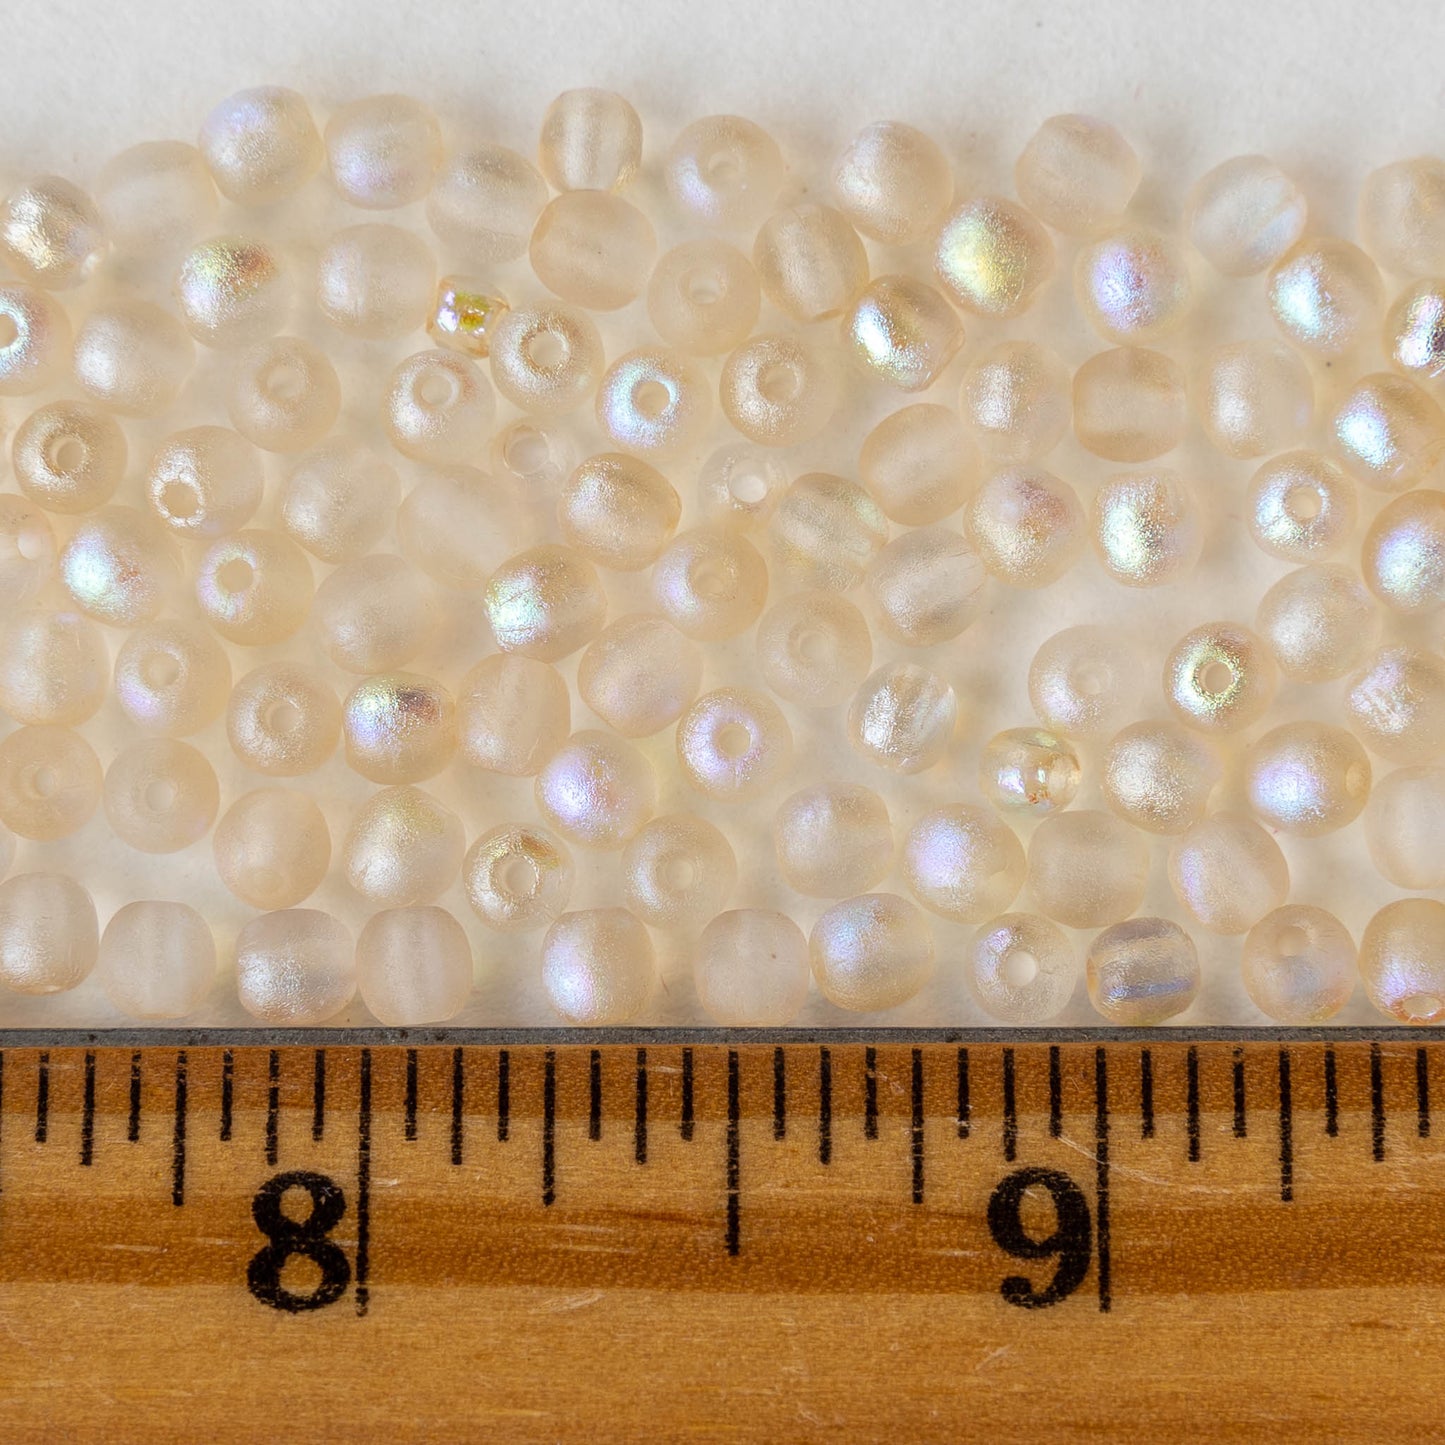 4mm Round Glass Beads - Frosted and Etched Champagne AB - 100 Beads